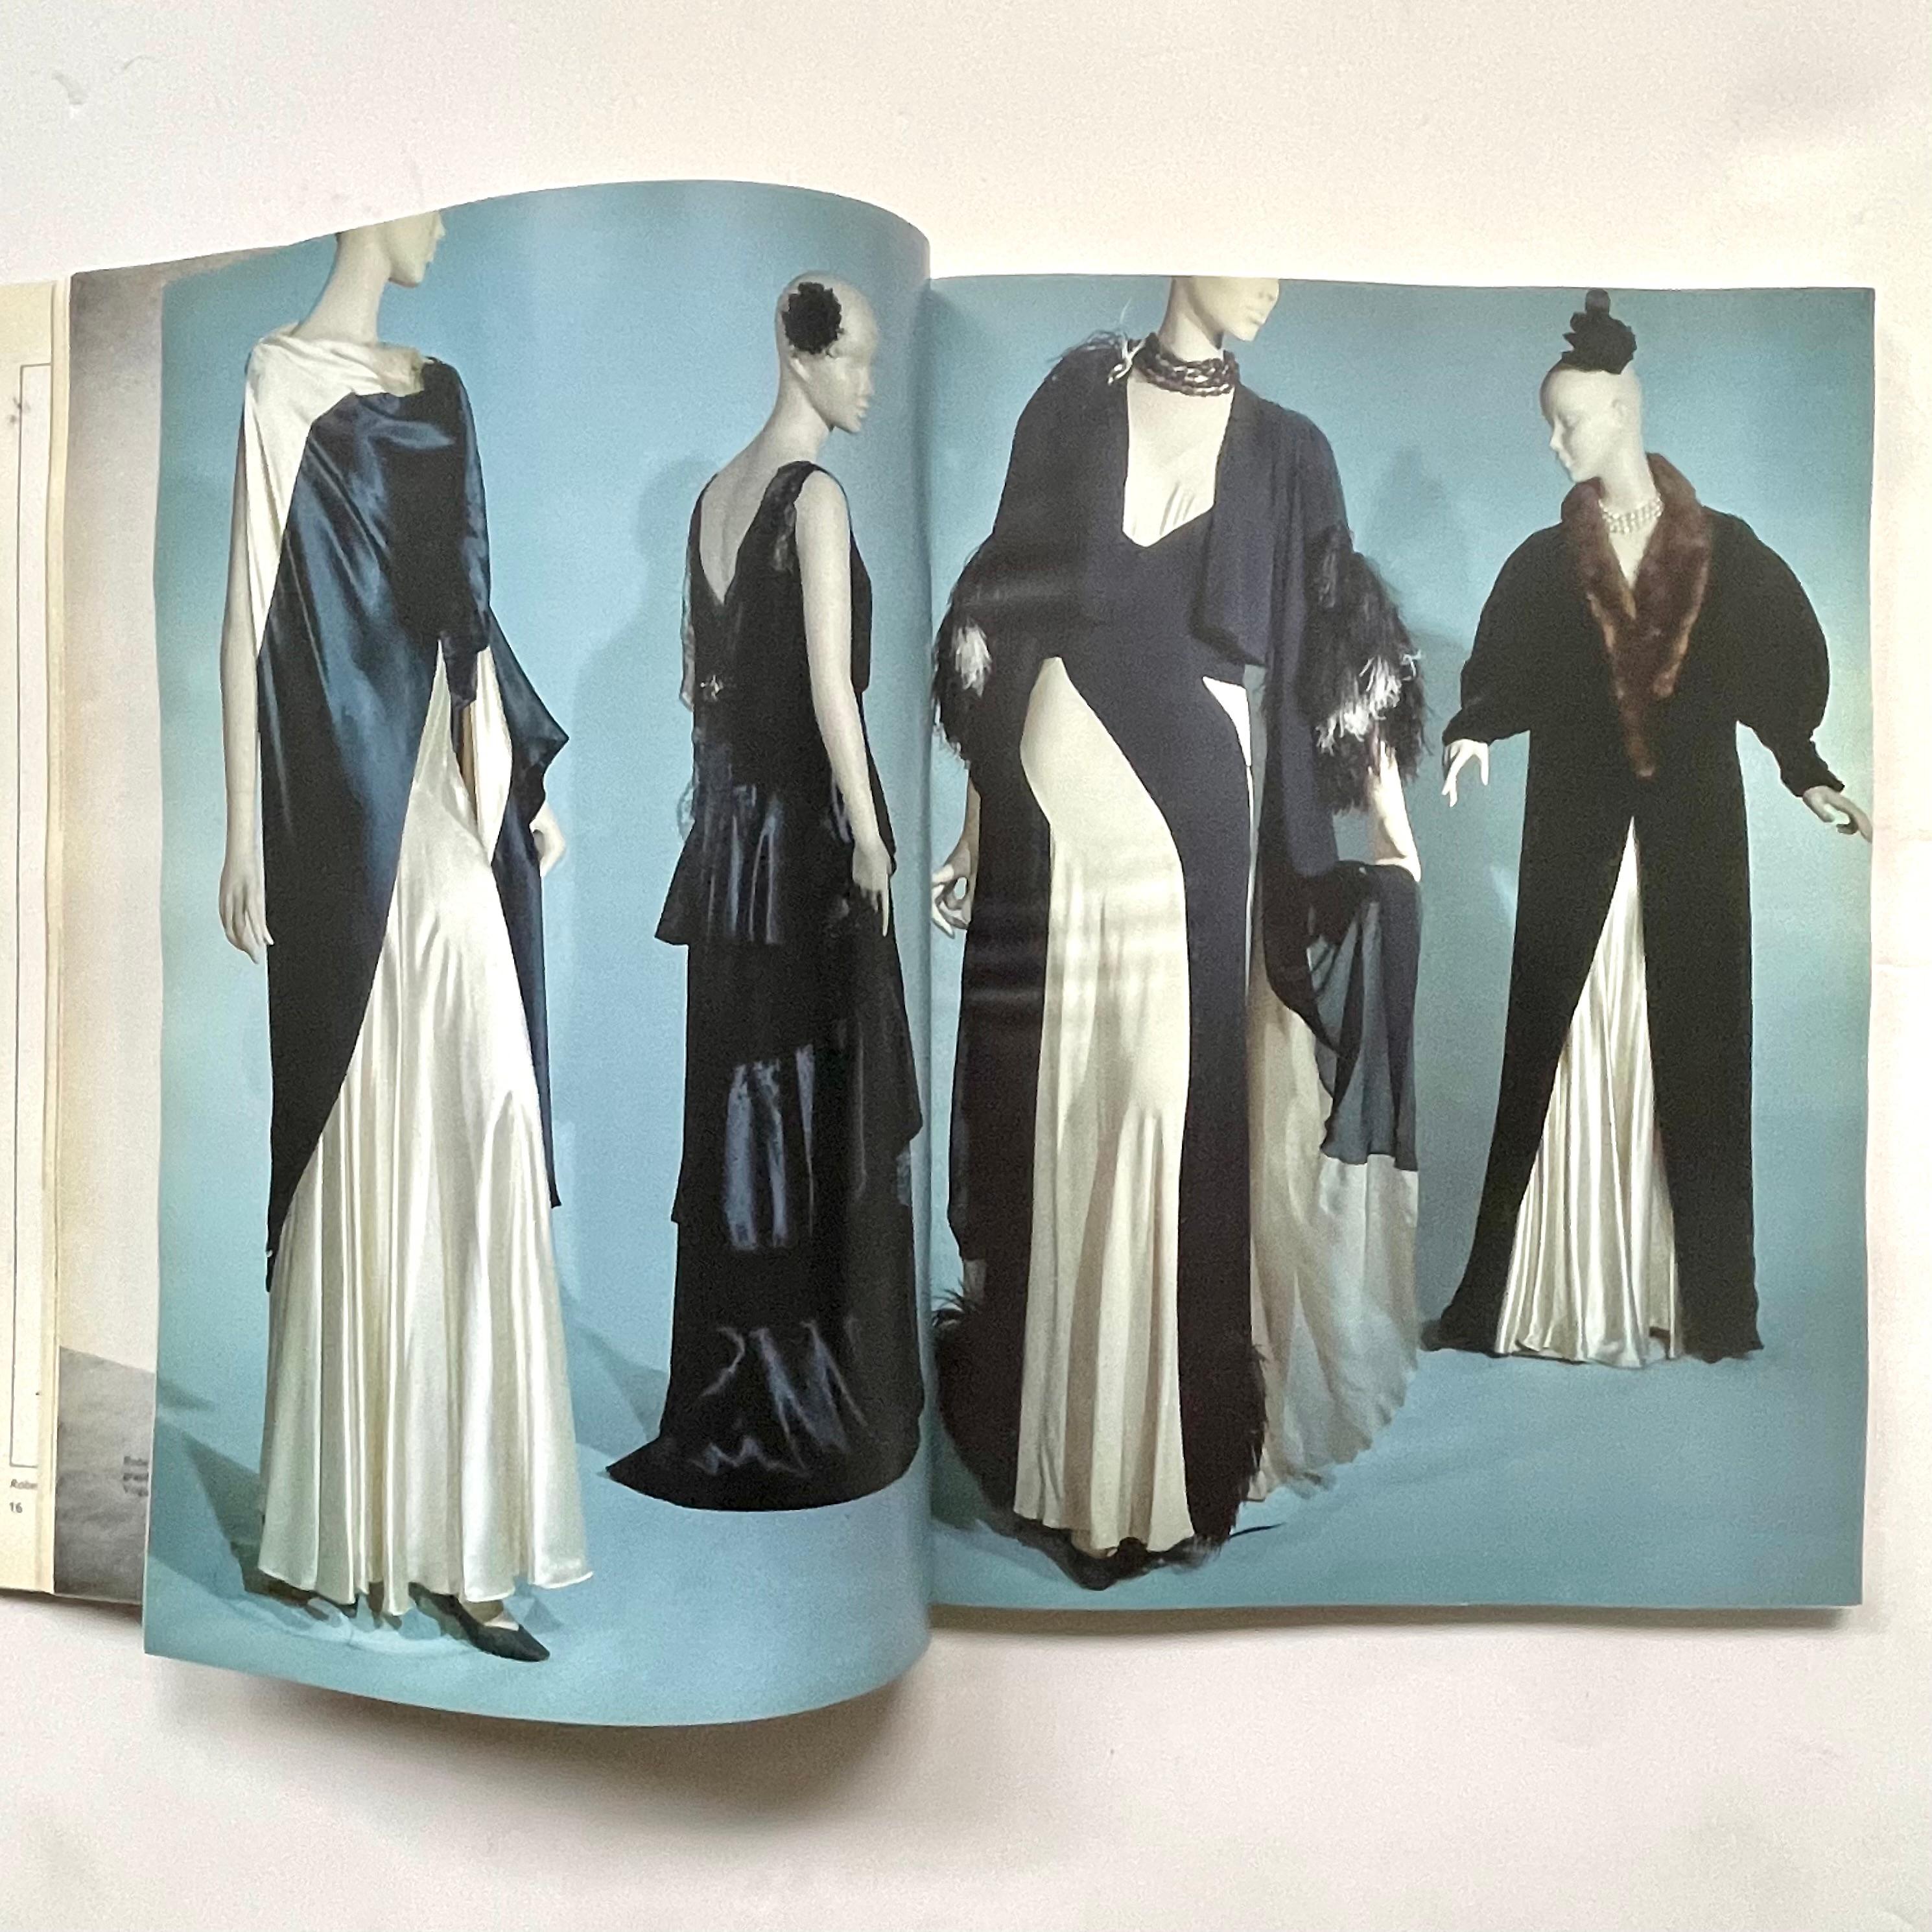 Musée de la Mode et Du Costume, Palais Galliera. Paris. 1st edition 1987. softcover text French

Rare Catalogue showcasing the major French fashion designers of the 1930's. a great resource of the french fashion houses of the period

Condition: Very